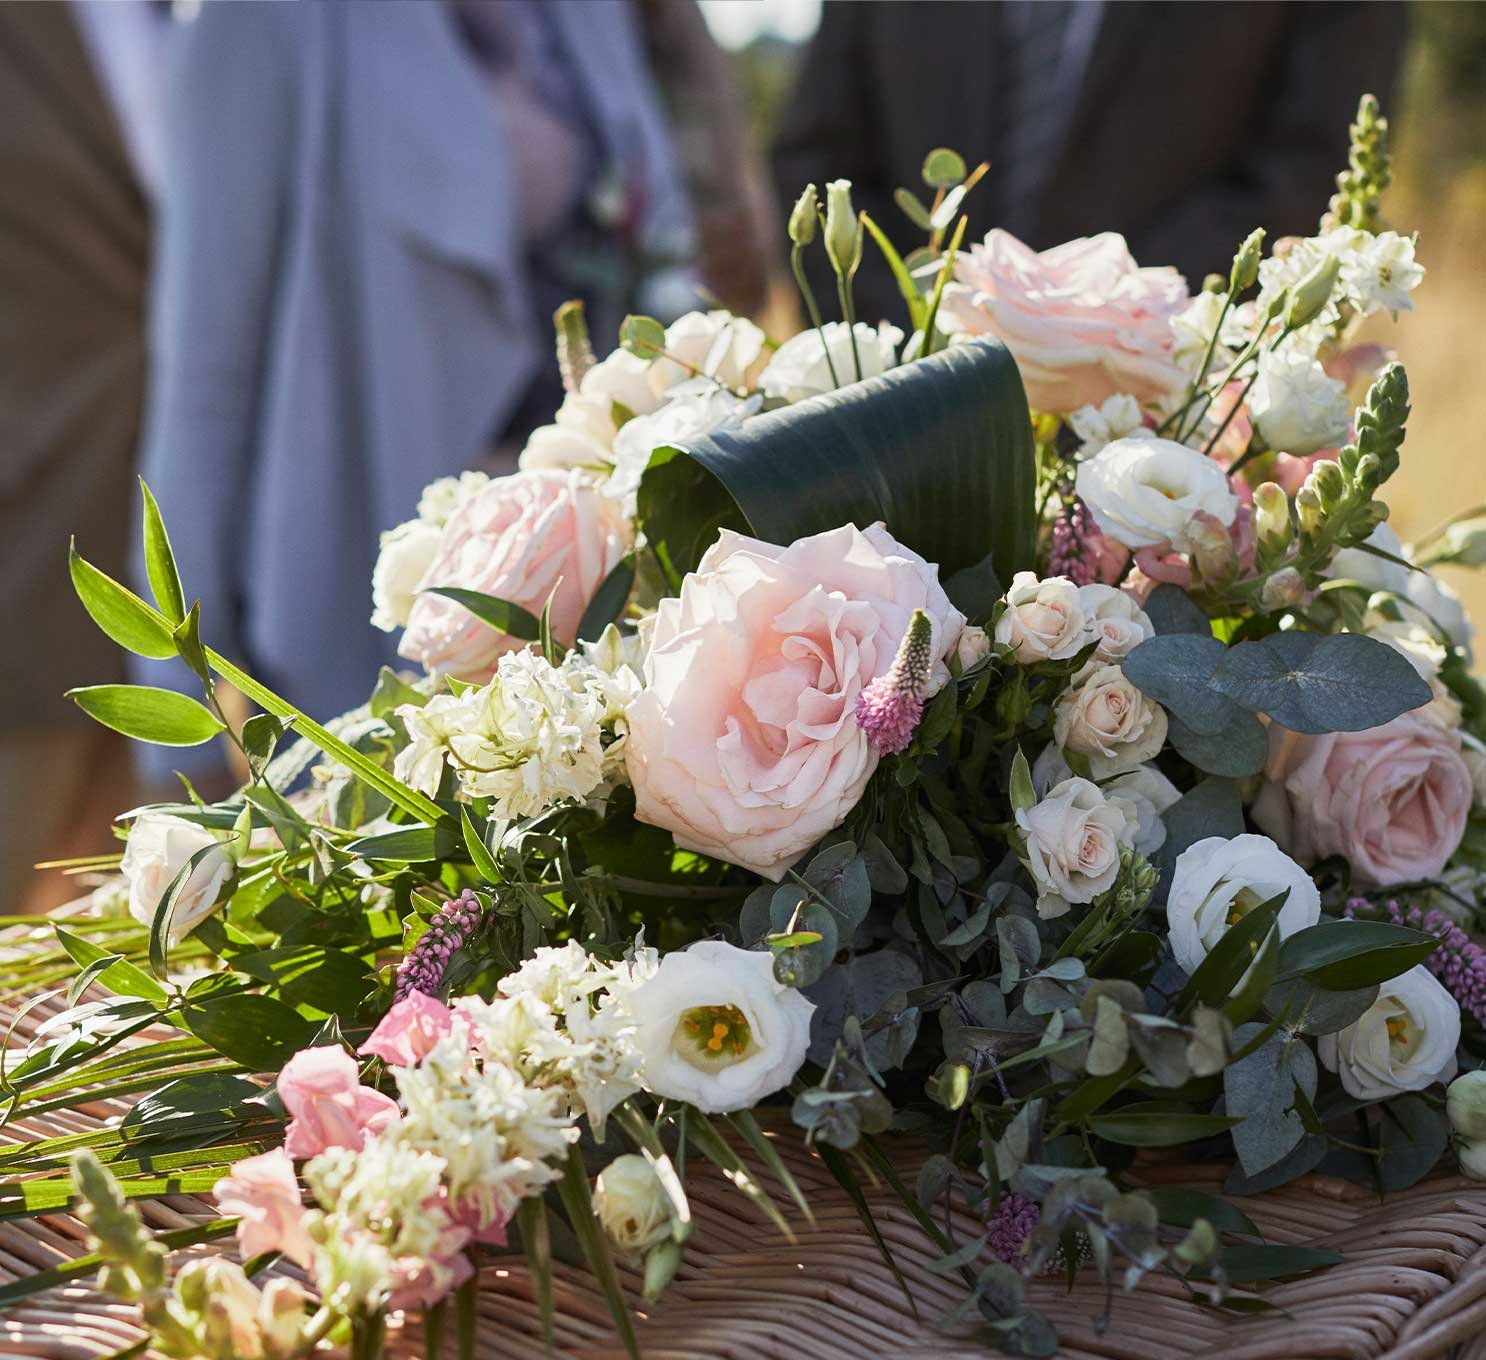 A classic spray of flowers rests upon a bamboo coffin.